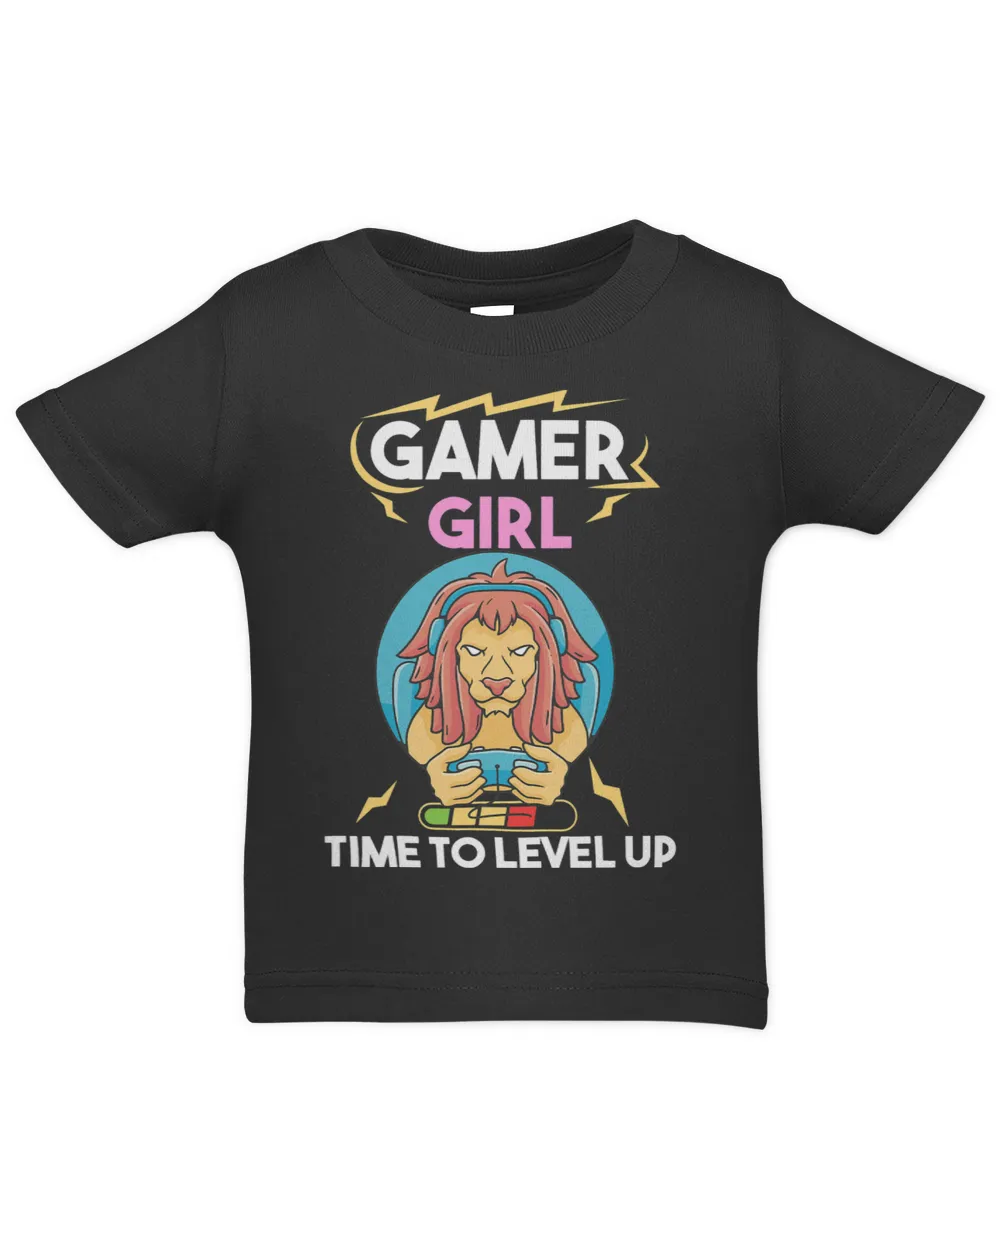 Gamer Girl Time to Level Up Lion Gaming Video Game Birthday